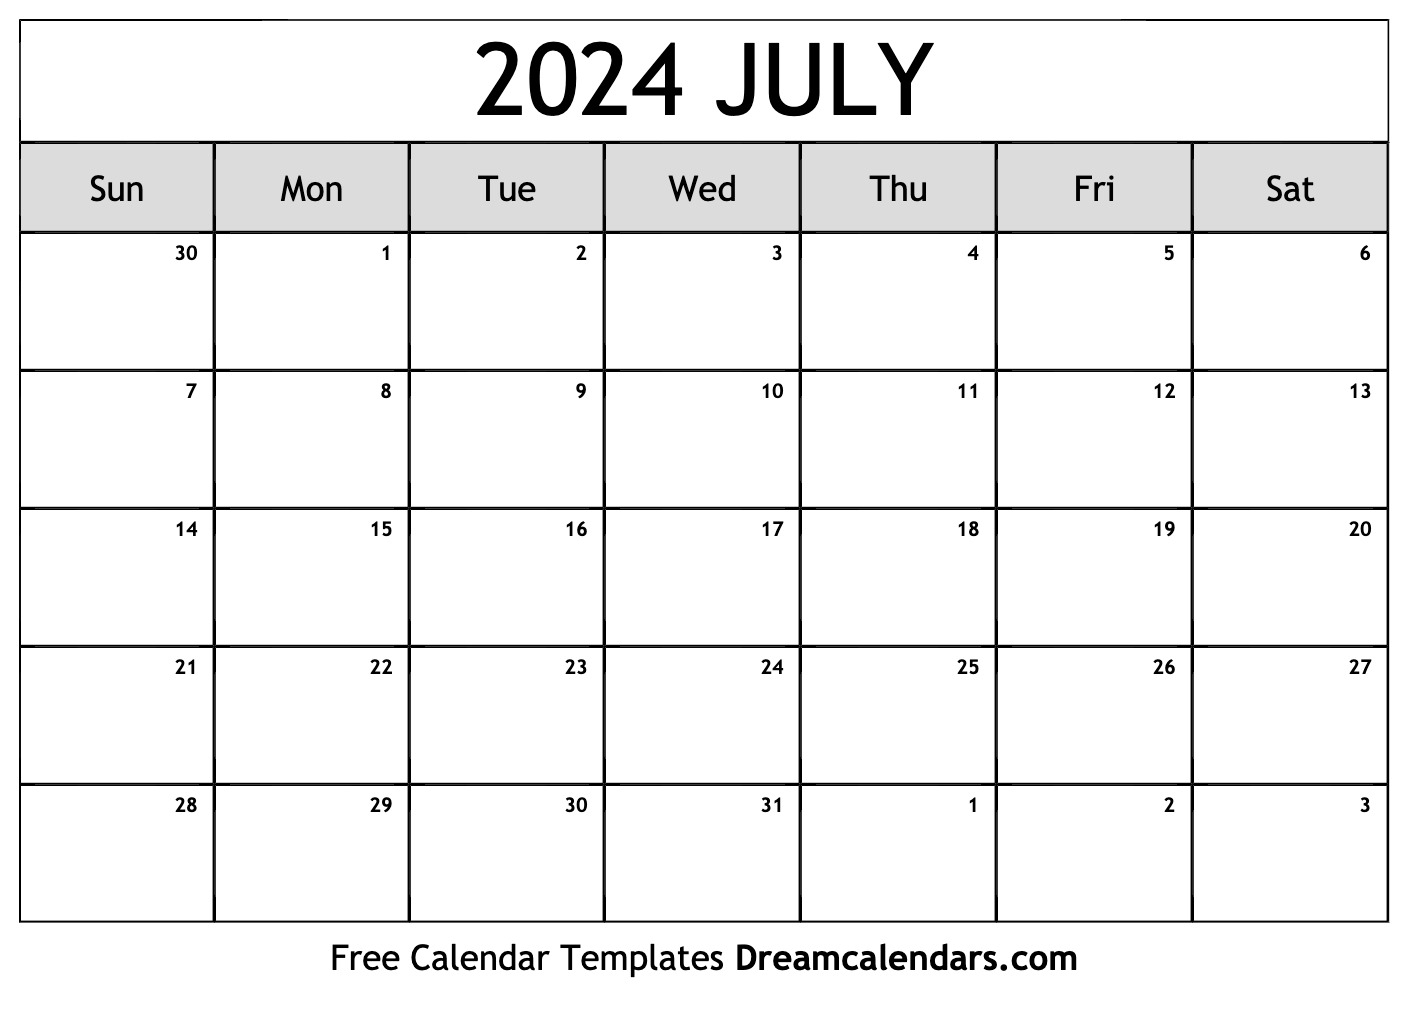 July 2024 Calendar | Free Blank Printable With Holidays for Printable 2024 July Calendar